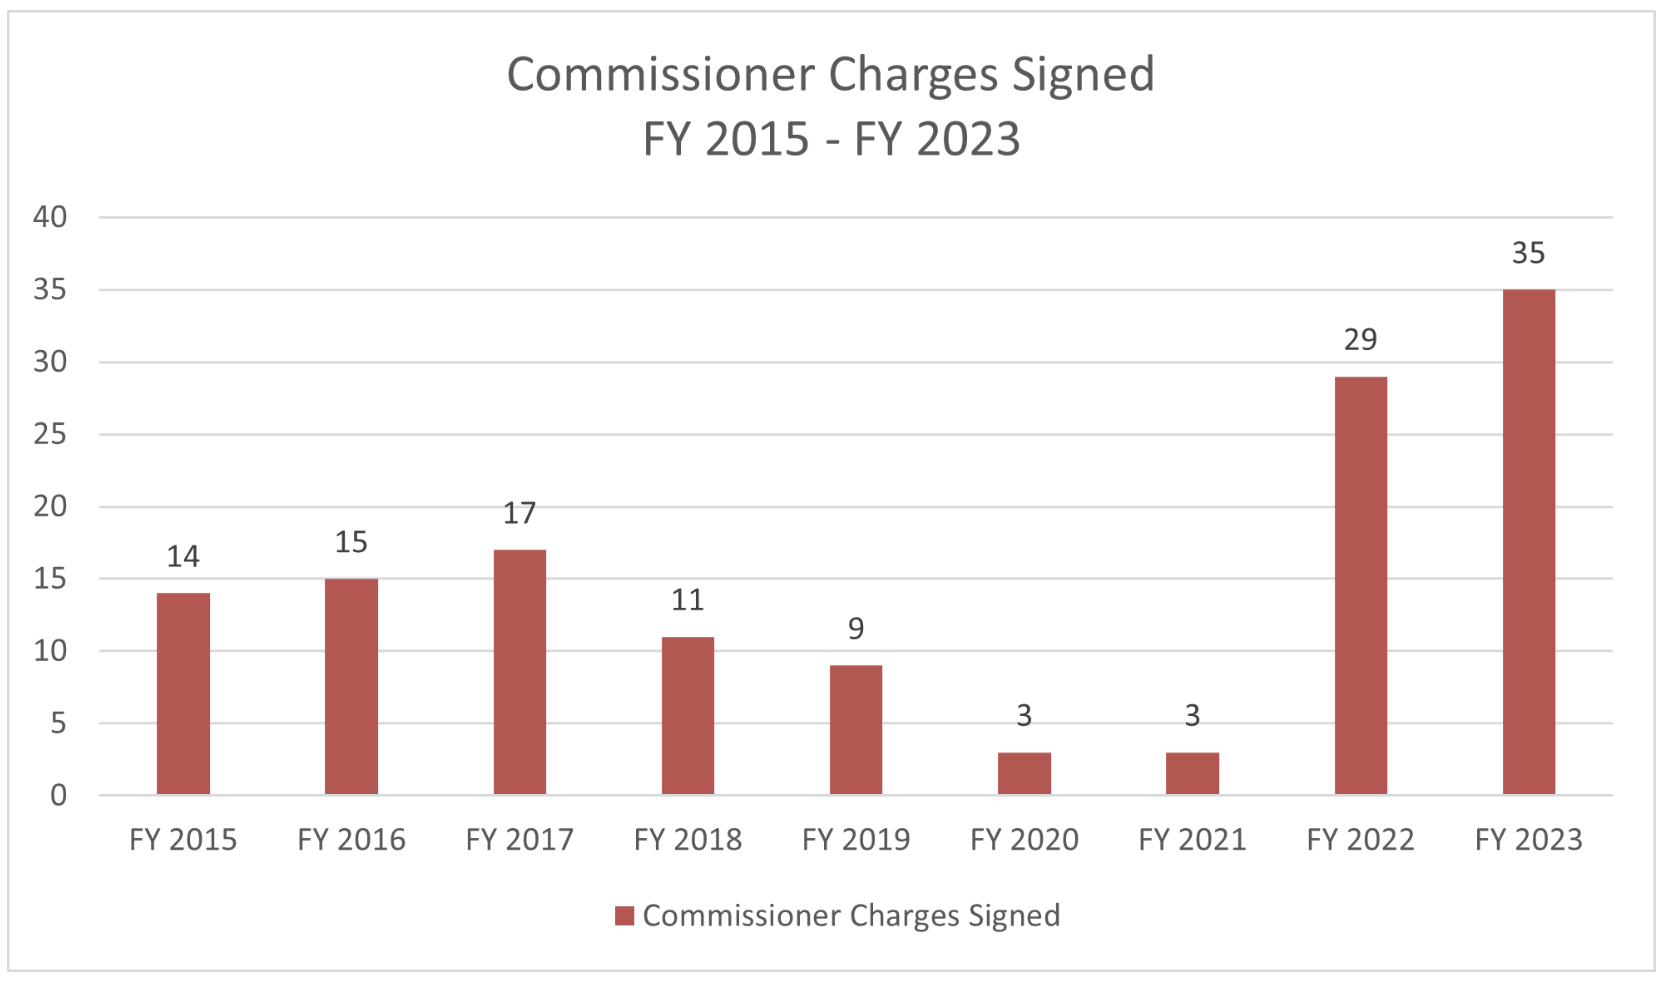 EEOC Commissioner Charges Signed FY 2015-2023